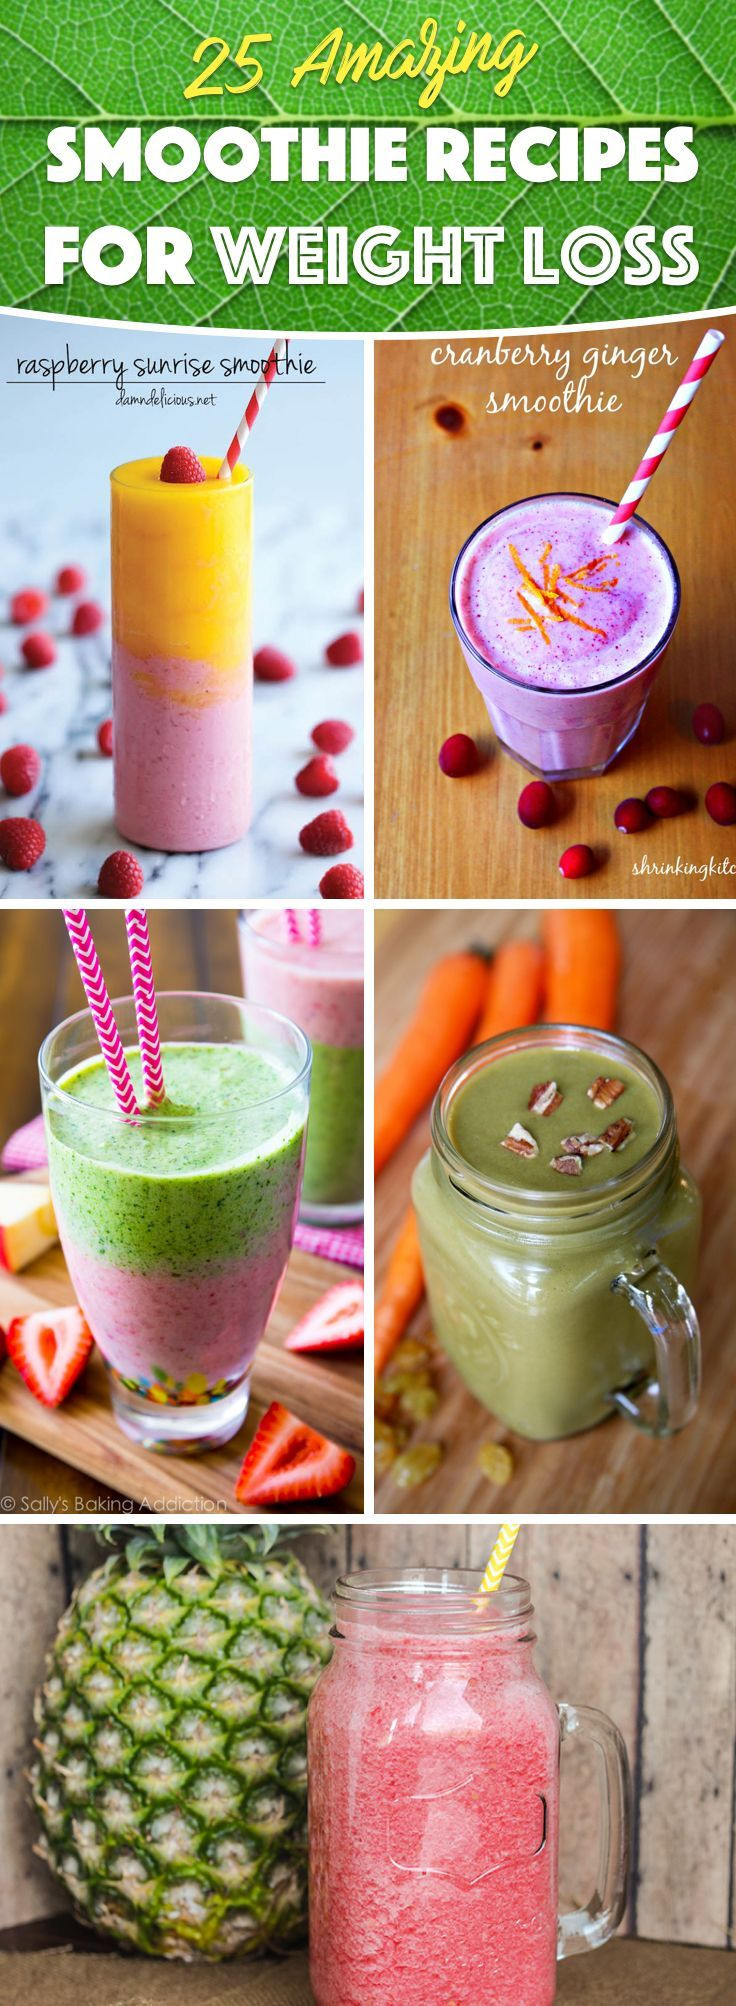 Weight Loss Smoothies For Diabetics
 Best 25 Weight loss smoothies ideas on Pinterest